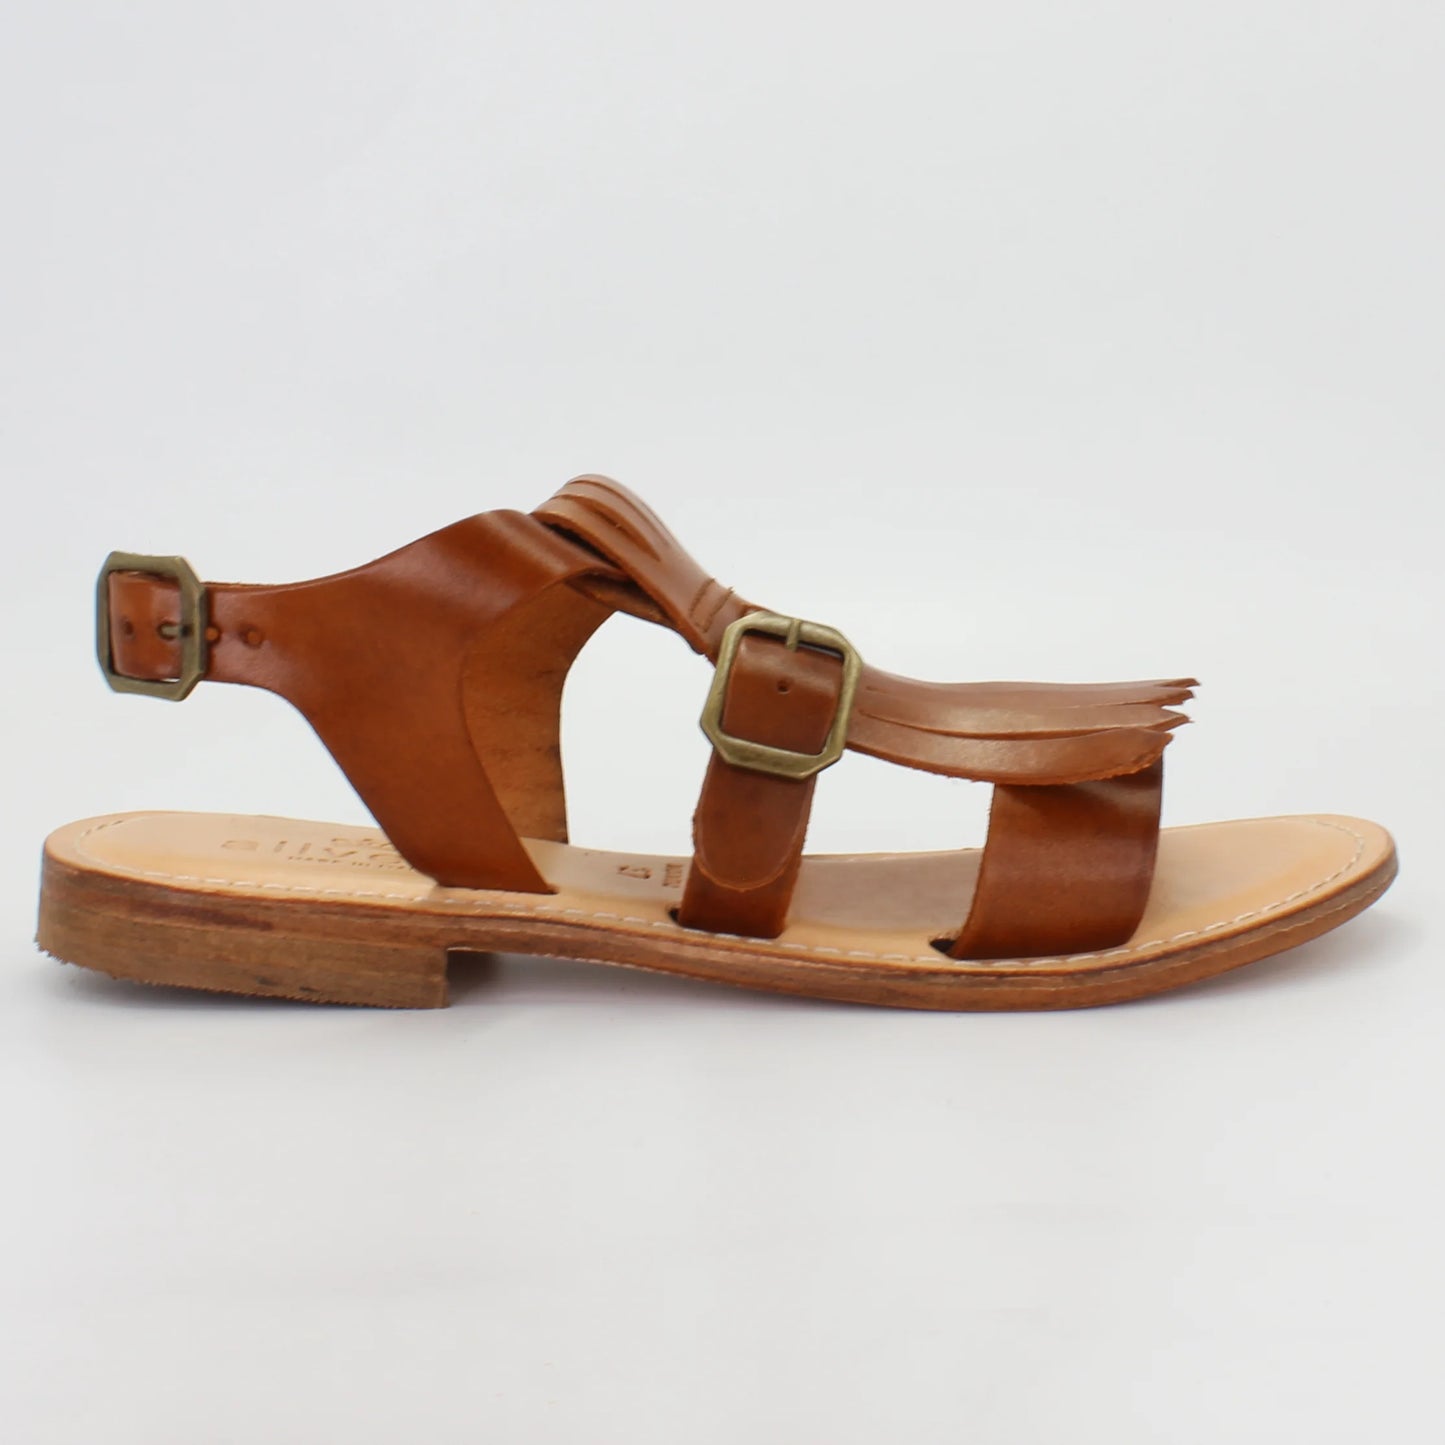 Shop Handmade Italian Leather sandal in cuoio (1361) or browse our range of hand-made Italian shoes in leather or suede in-store at Aliverti Cape Town, or shop online. We deliver in South Africa & offer multiple payment plans as well as accept multiple safe & secure payment methods.